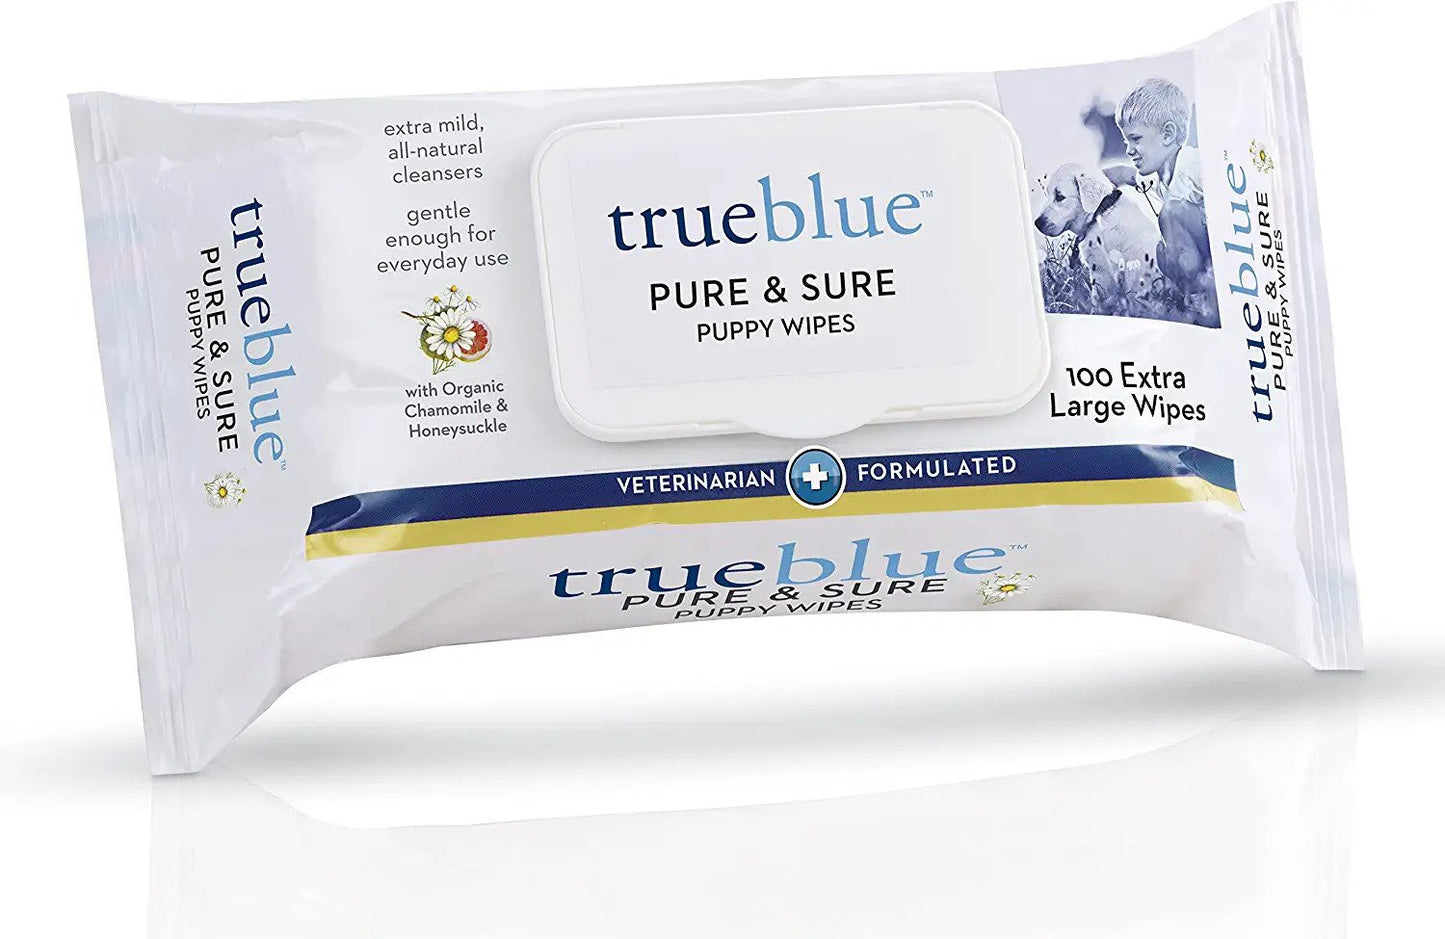 Pure & Sure Puppy Wipes